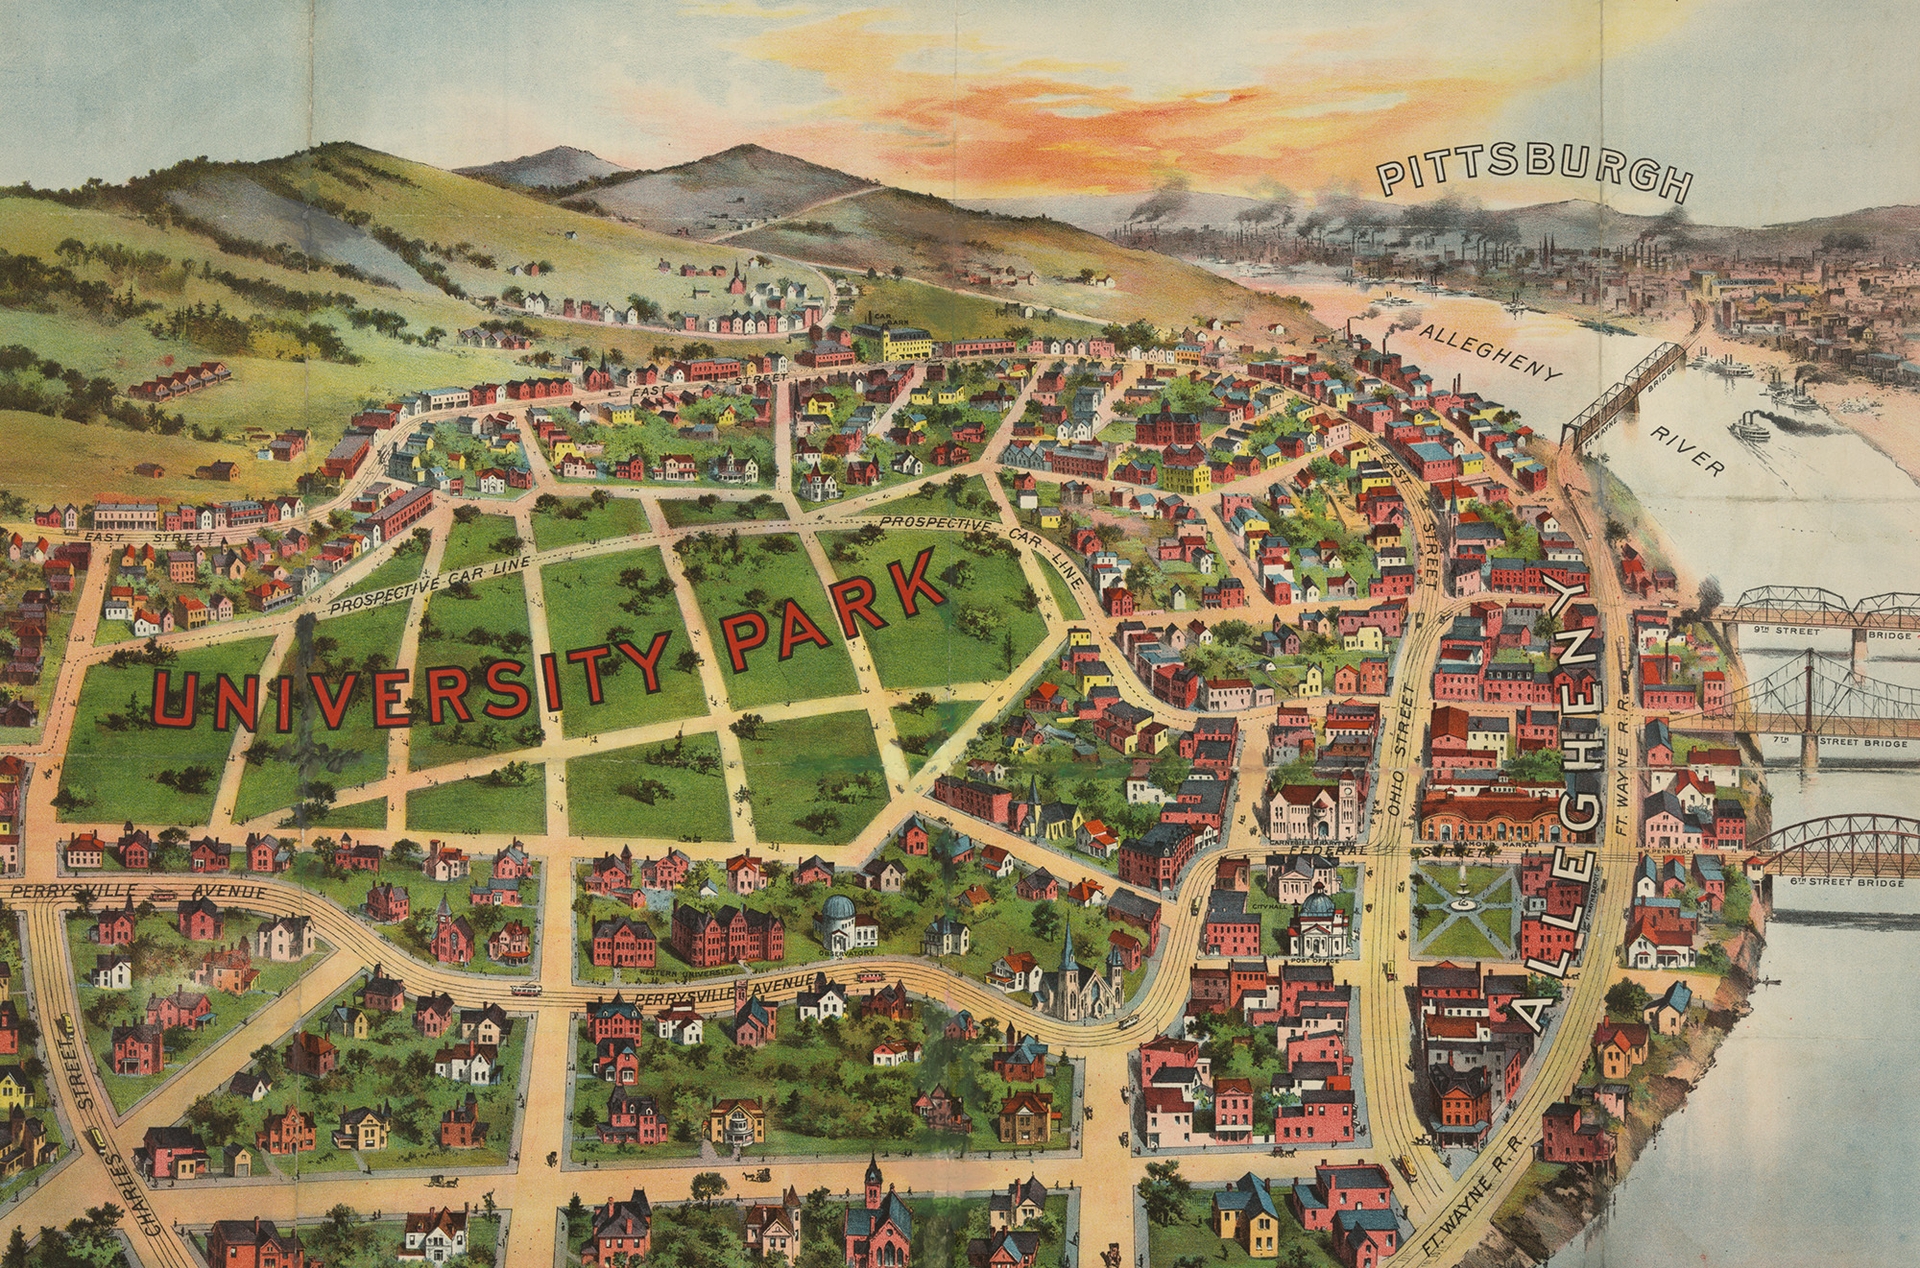 Advertising poster announcing sale of residential lots in "University Park" in Allegheny, Pennsylvania, showing a bird's-eye view of Allegheny with the Allegheny River on the right and Pittsburgh across the river, in the background.